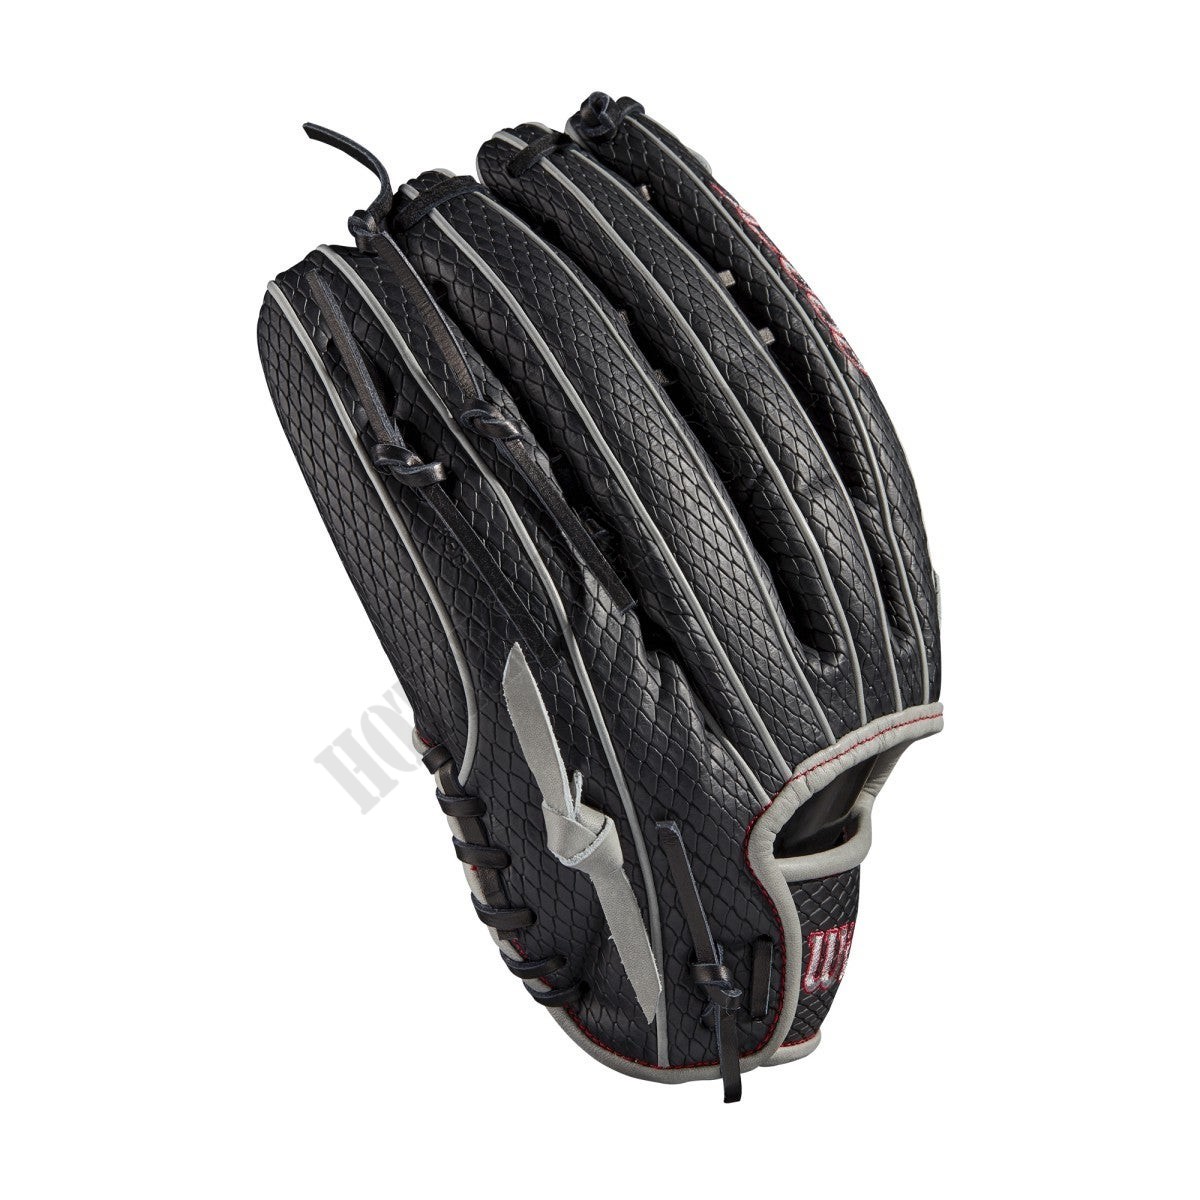 2021 A2000 PF92SS 12.25" Pedroia Fit Outfield Baseball Glove ● Wilson Promotions - -4